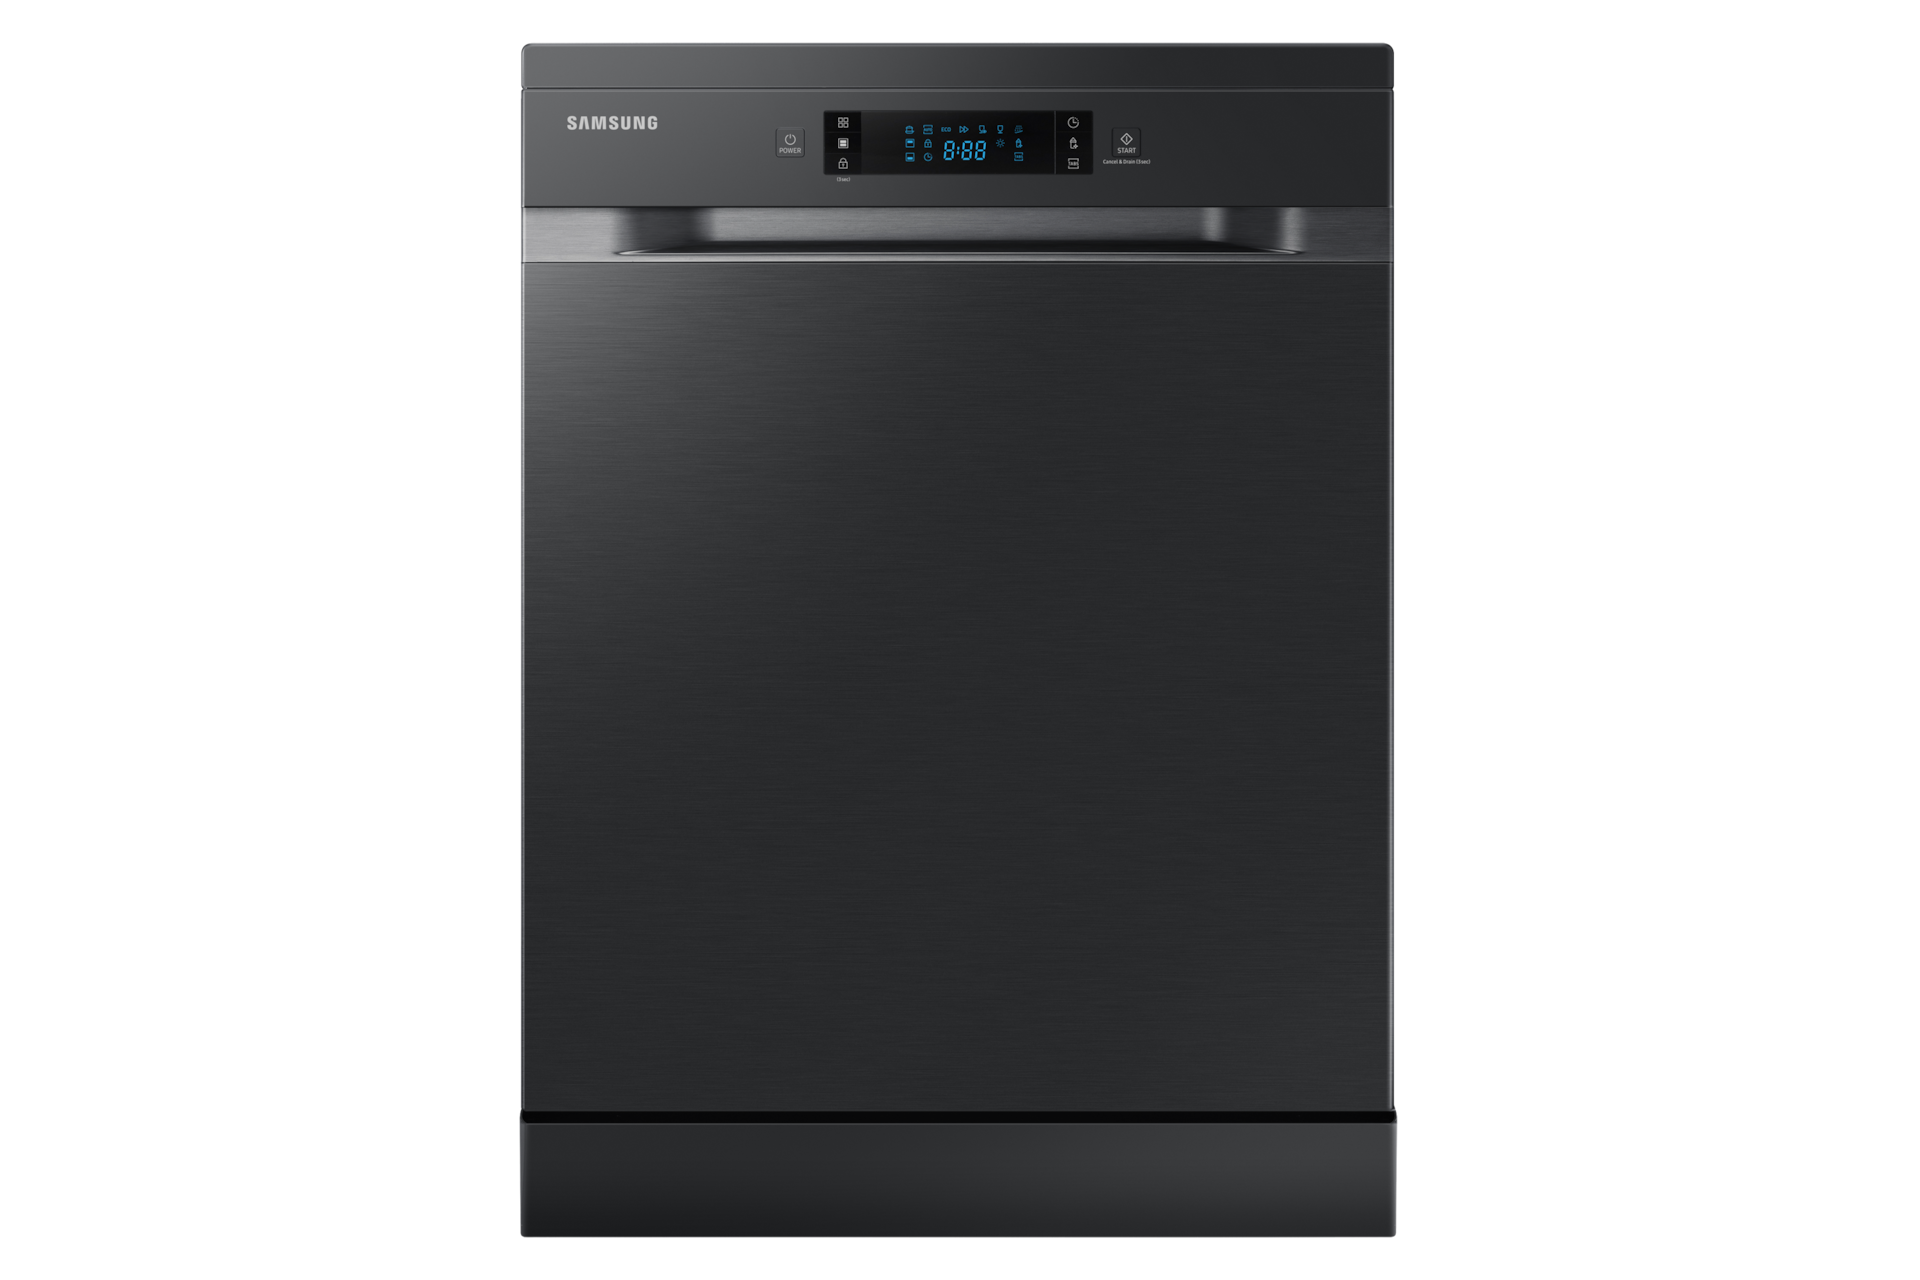 Check out Samsung DW60M6055FG 60cm Black Dishwasher now. Image shows black dishwasher seen from the front